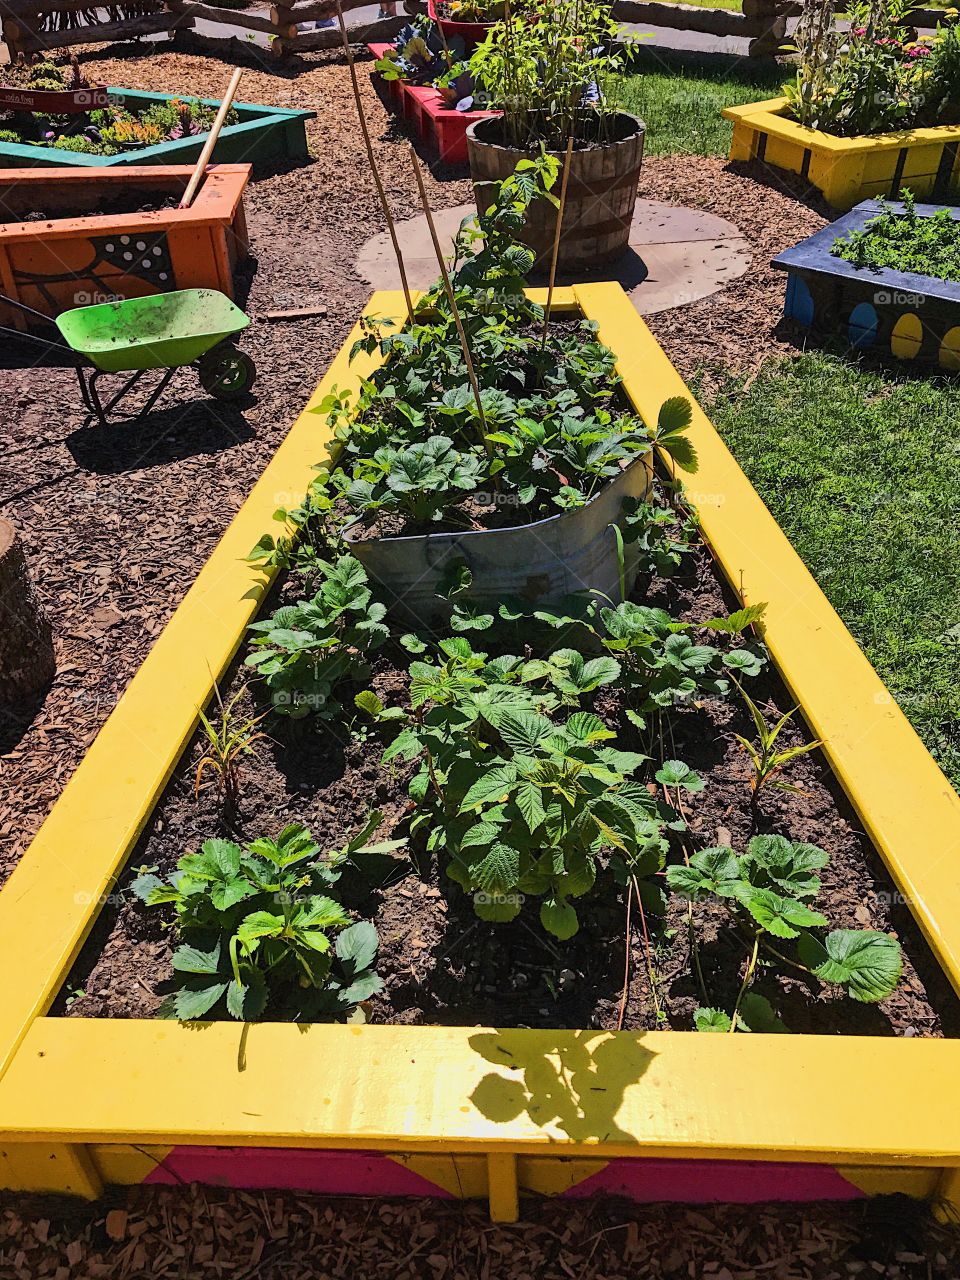 Plants in colorful raised beds outdoors